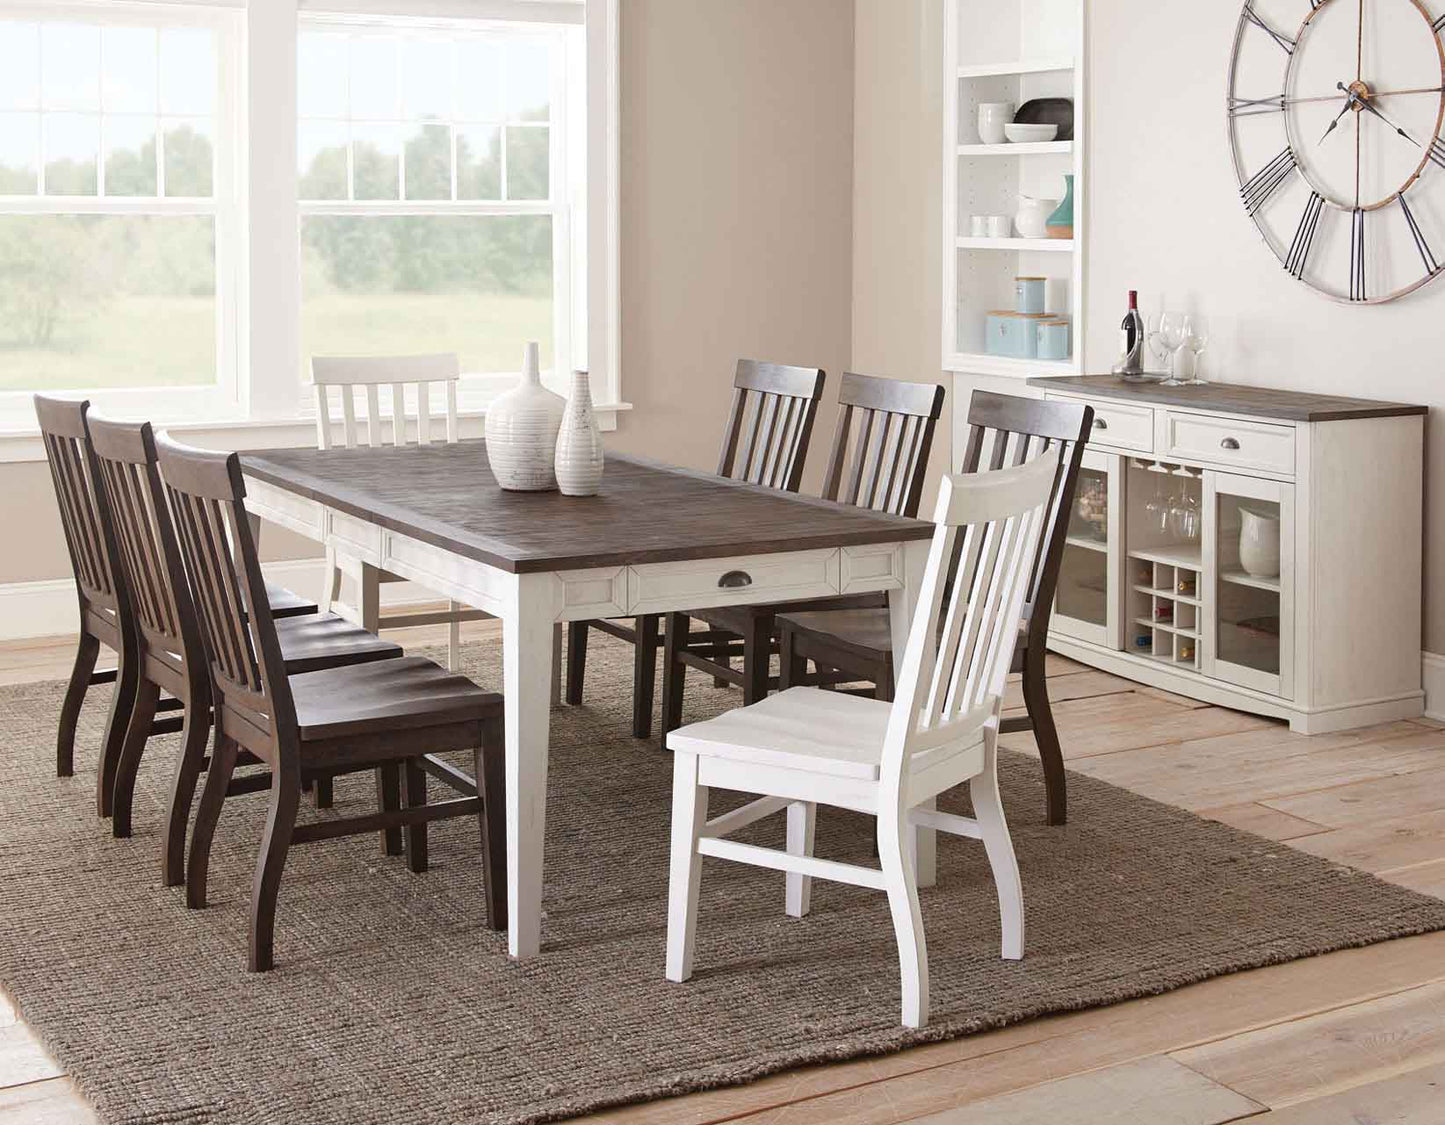 Cayla Dark Oak Dining Chairs (includes 2 chairs) by Steve Silver